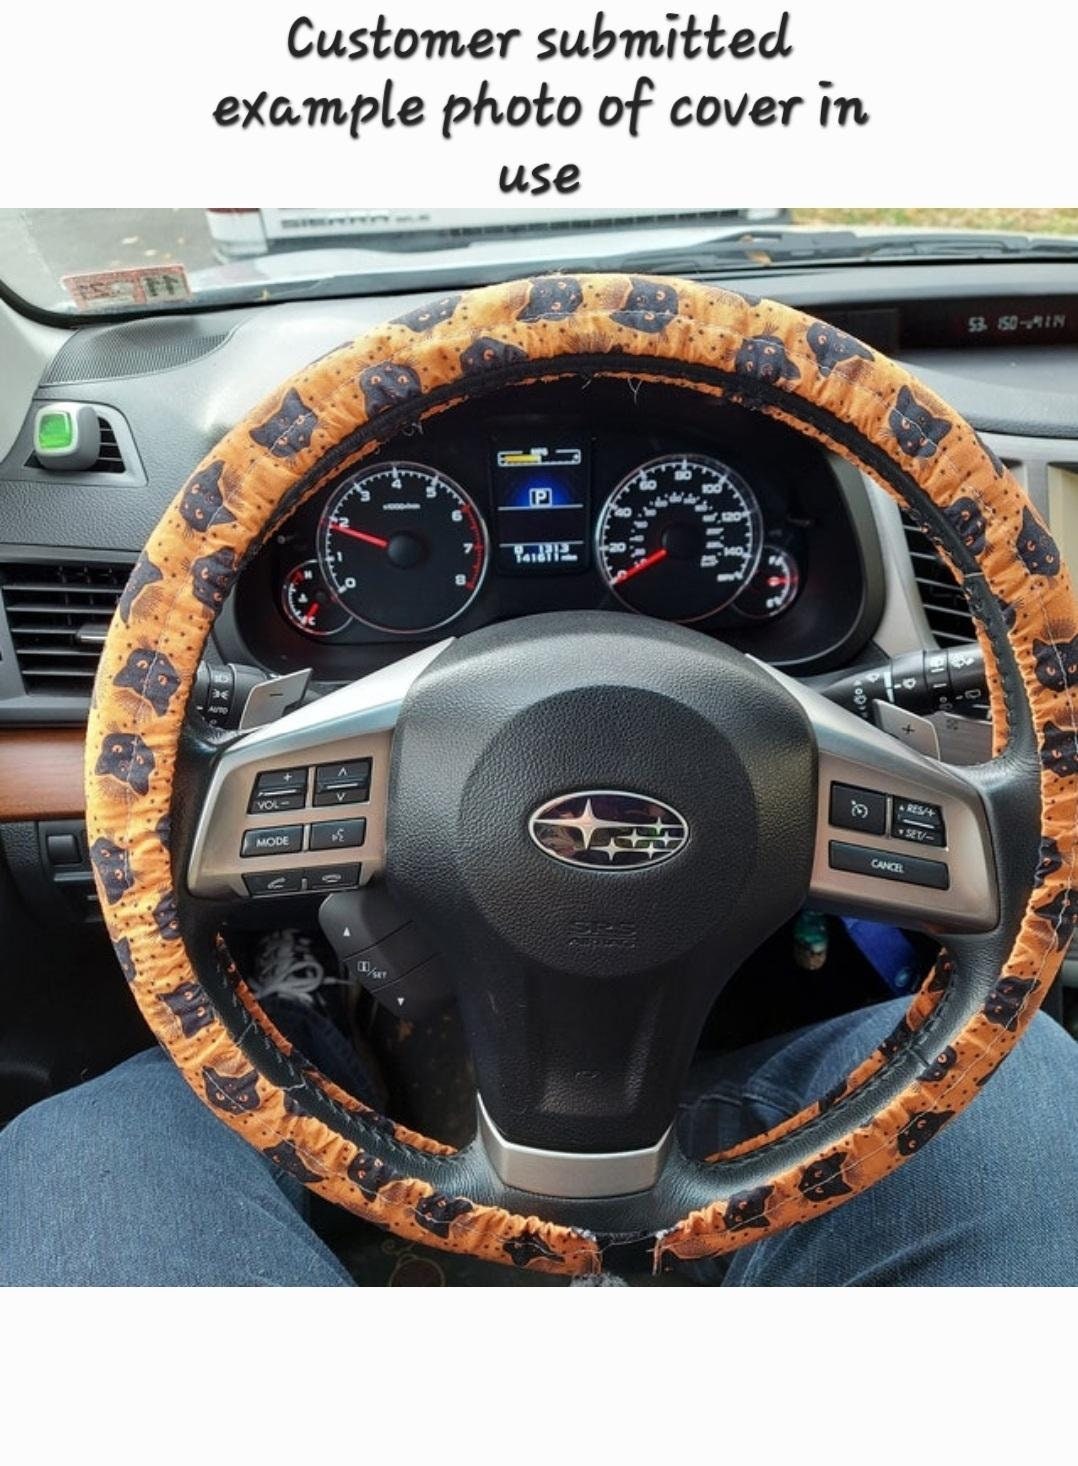 Floral Steering Wheel Cover, Car Accessories, 100% Cotton Washable - Harlow's Store and Garden Gifts